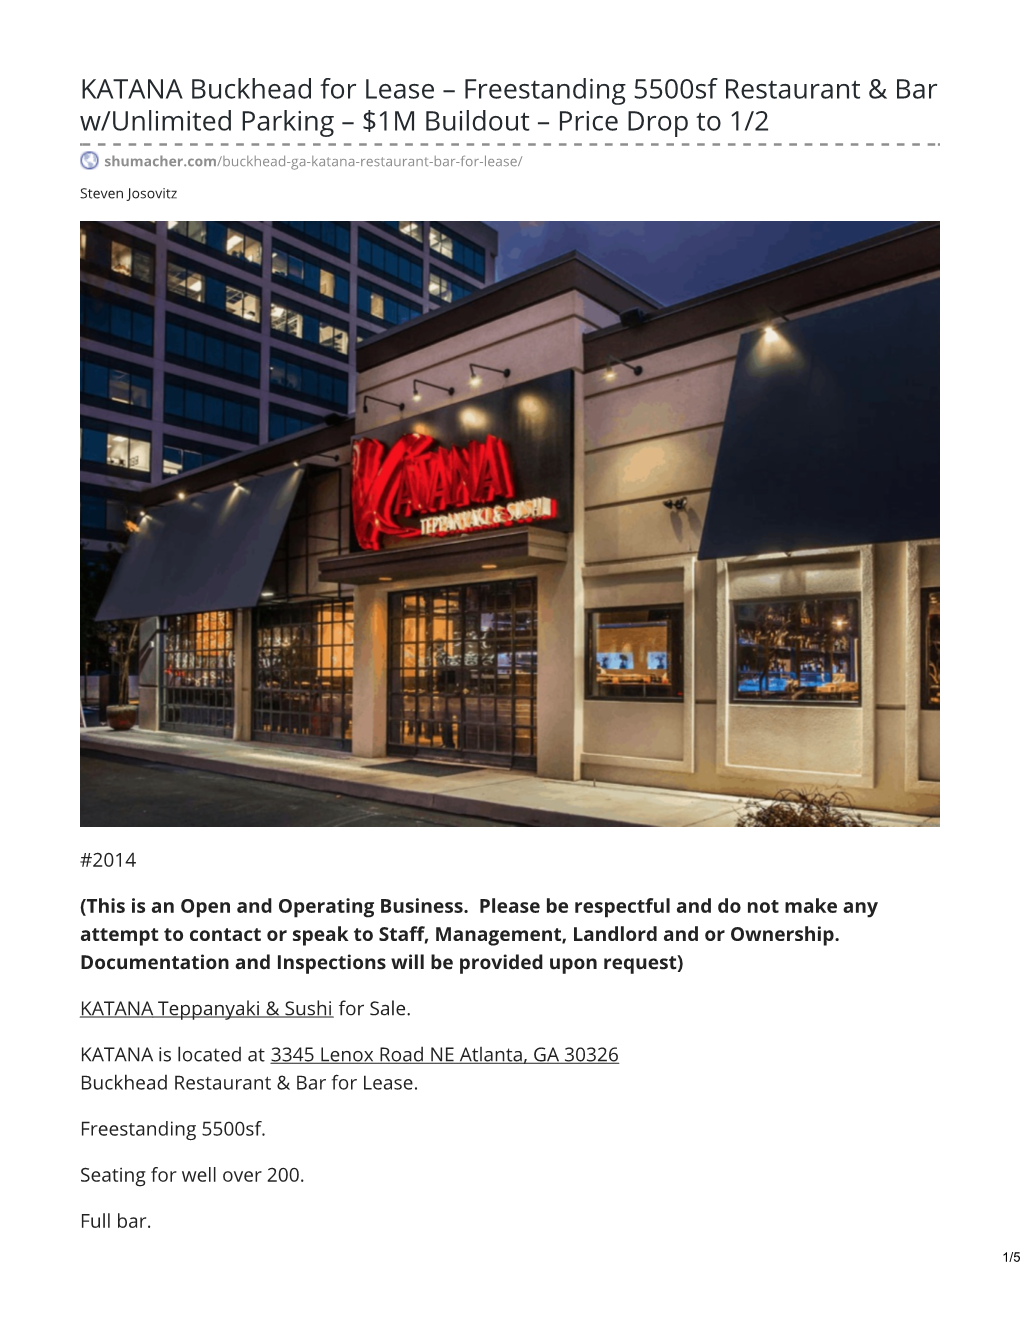 KATANA Buckhead for Lease – Freestanding 5500Sf Restaurant & Bar W/Unlimited Parking – $1M Buildout – Price Drop to 1/2